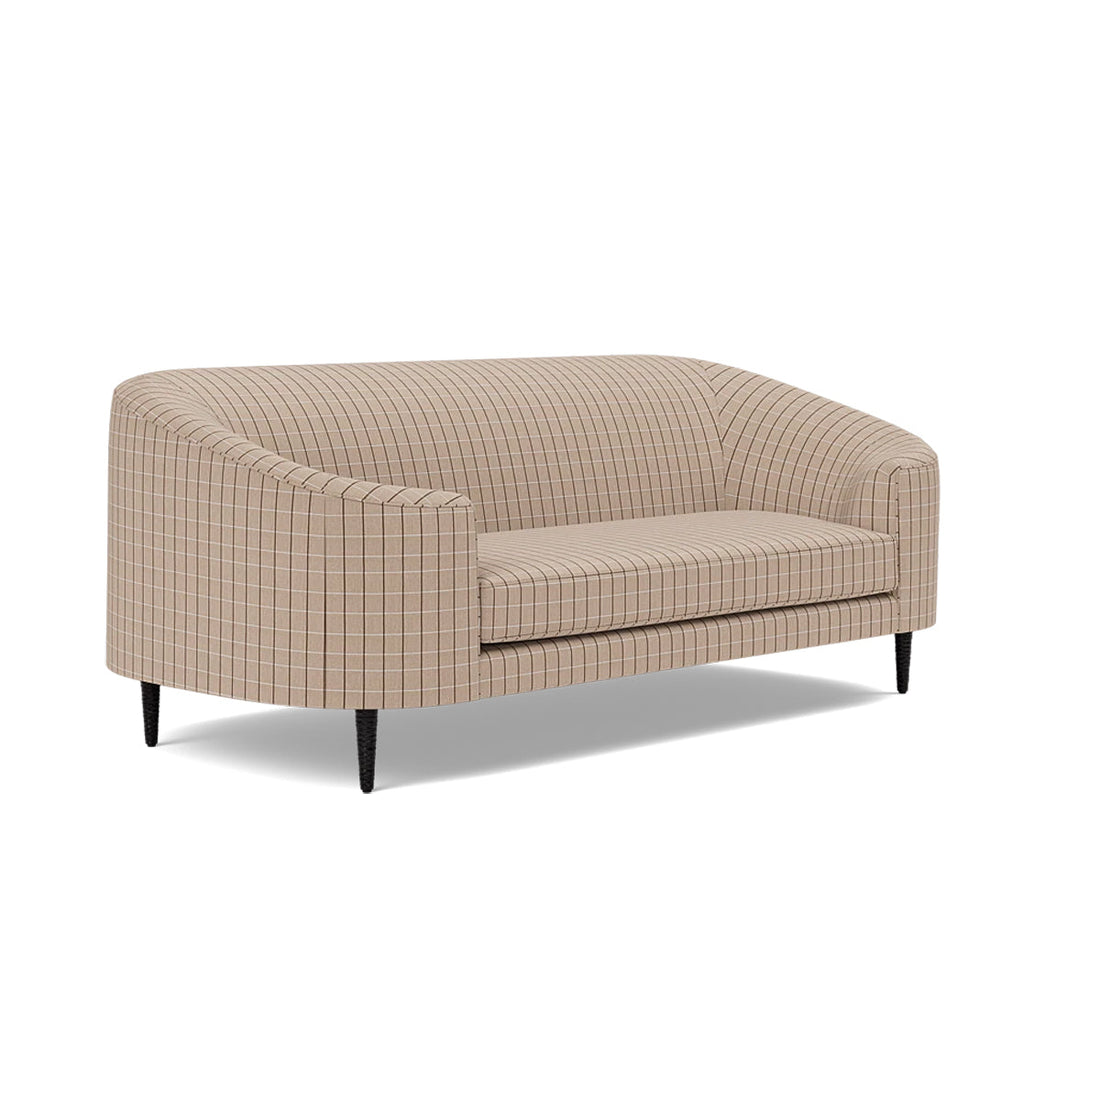 Made Goods Basset Contemporary Cabriole-Style Sofa in Clyde Fabric